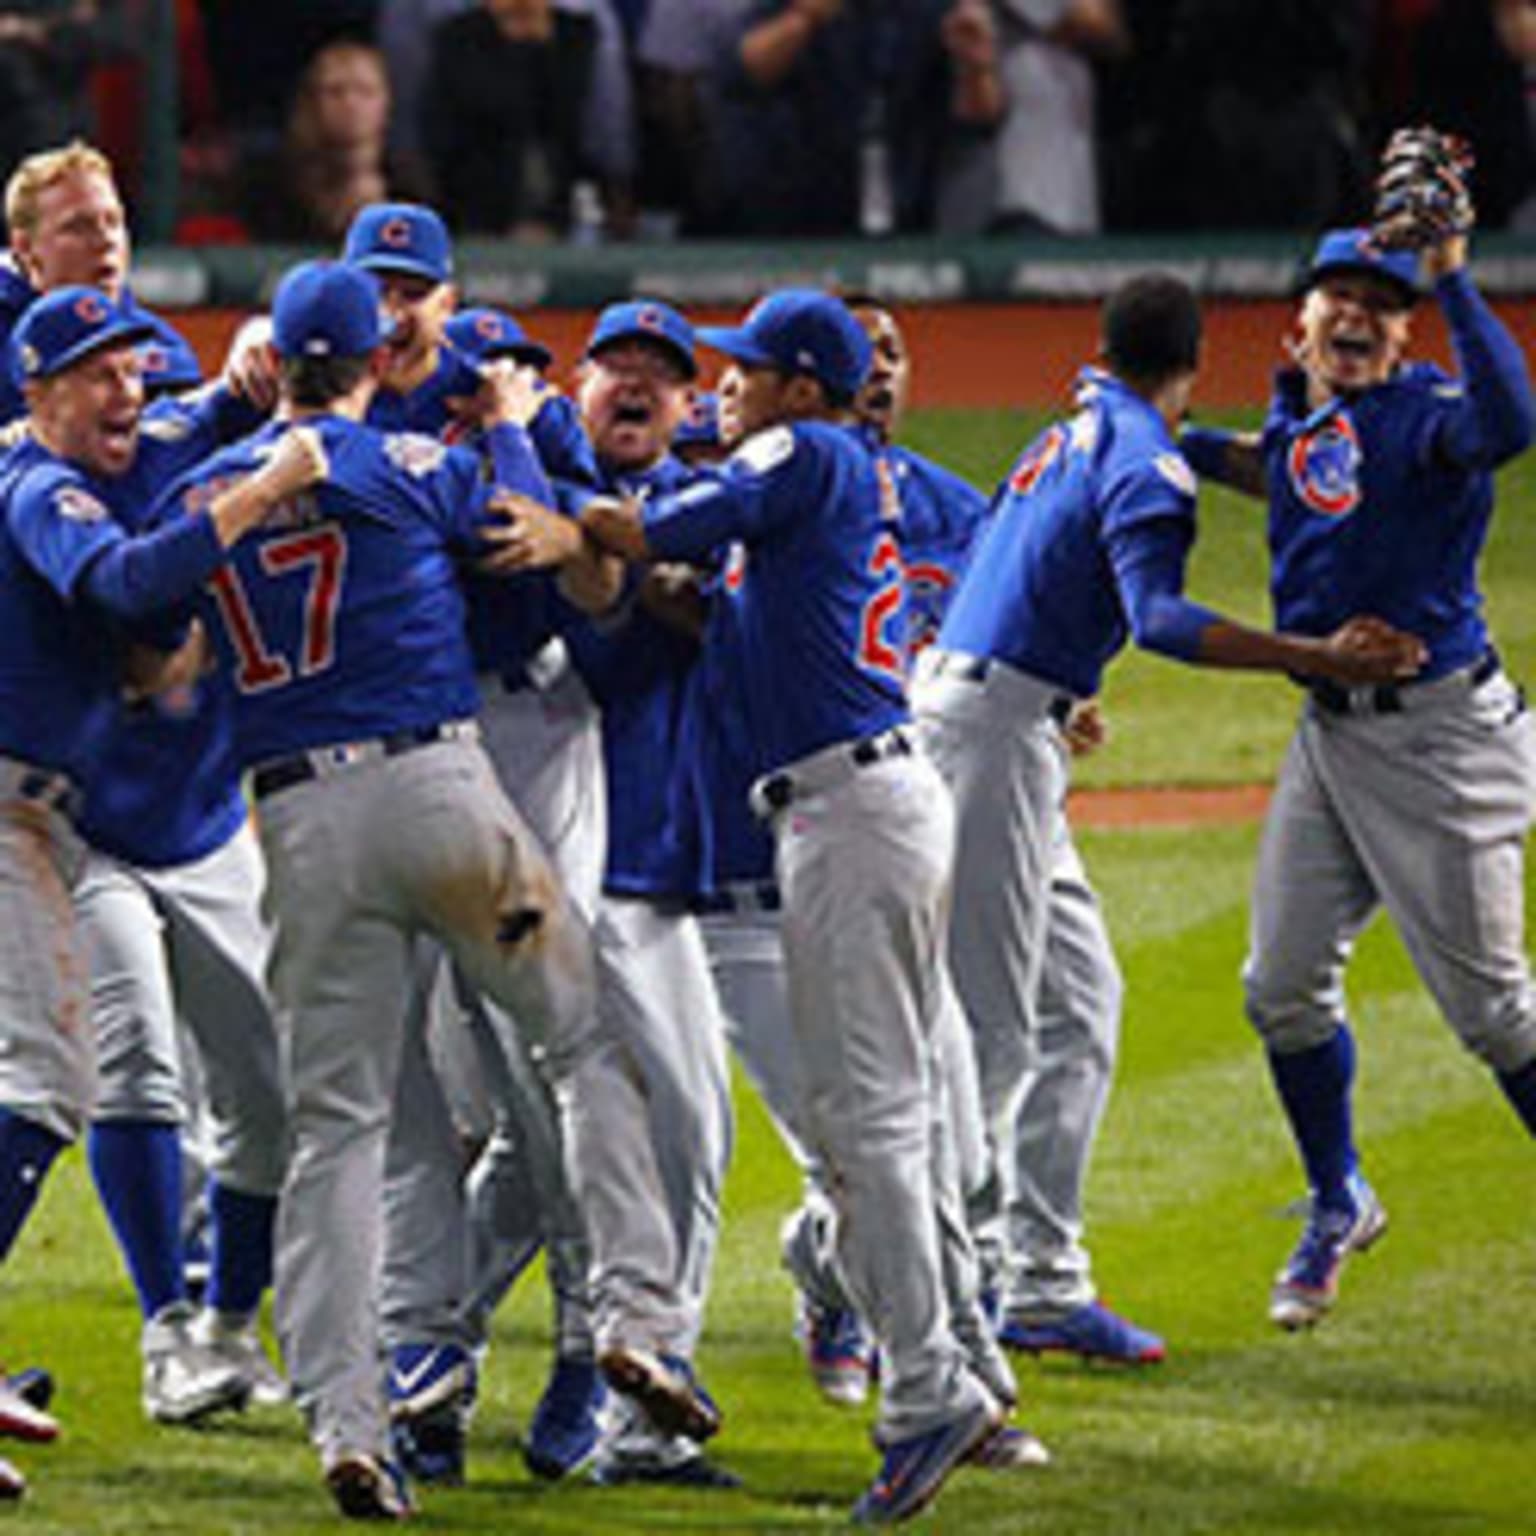 A 2010s Sporting Highlight? Chicago Cubs' World Series Win